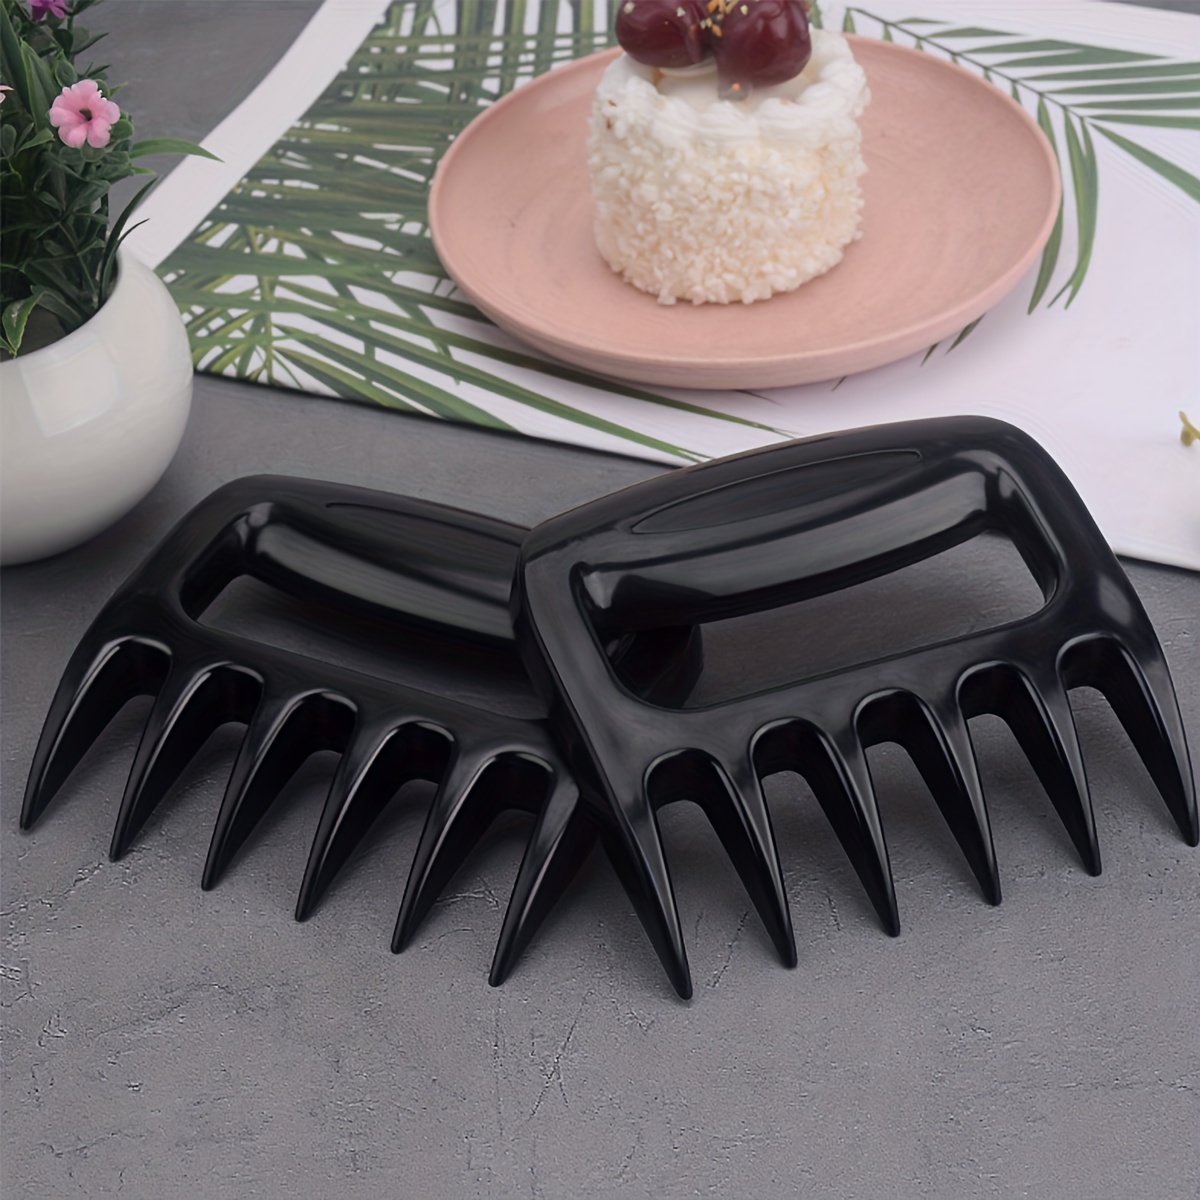 1pc Original Shredder Barbecue Claws, Easily Lift, Handle, Shred, And Cut  Meats Ultra-Sharp Blades And Heat Resistant, Grilling & Barbecue Utensils